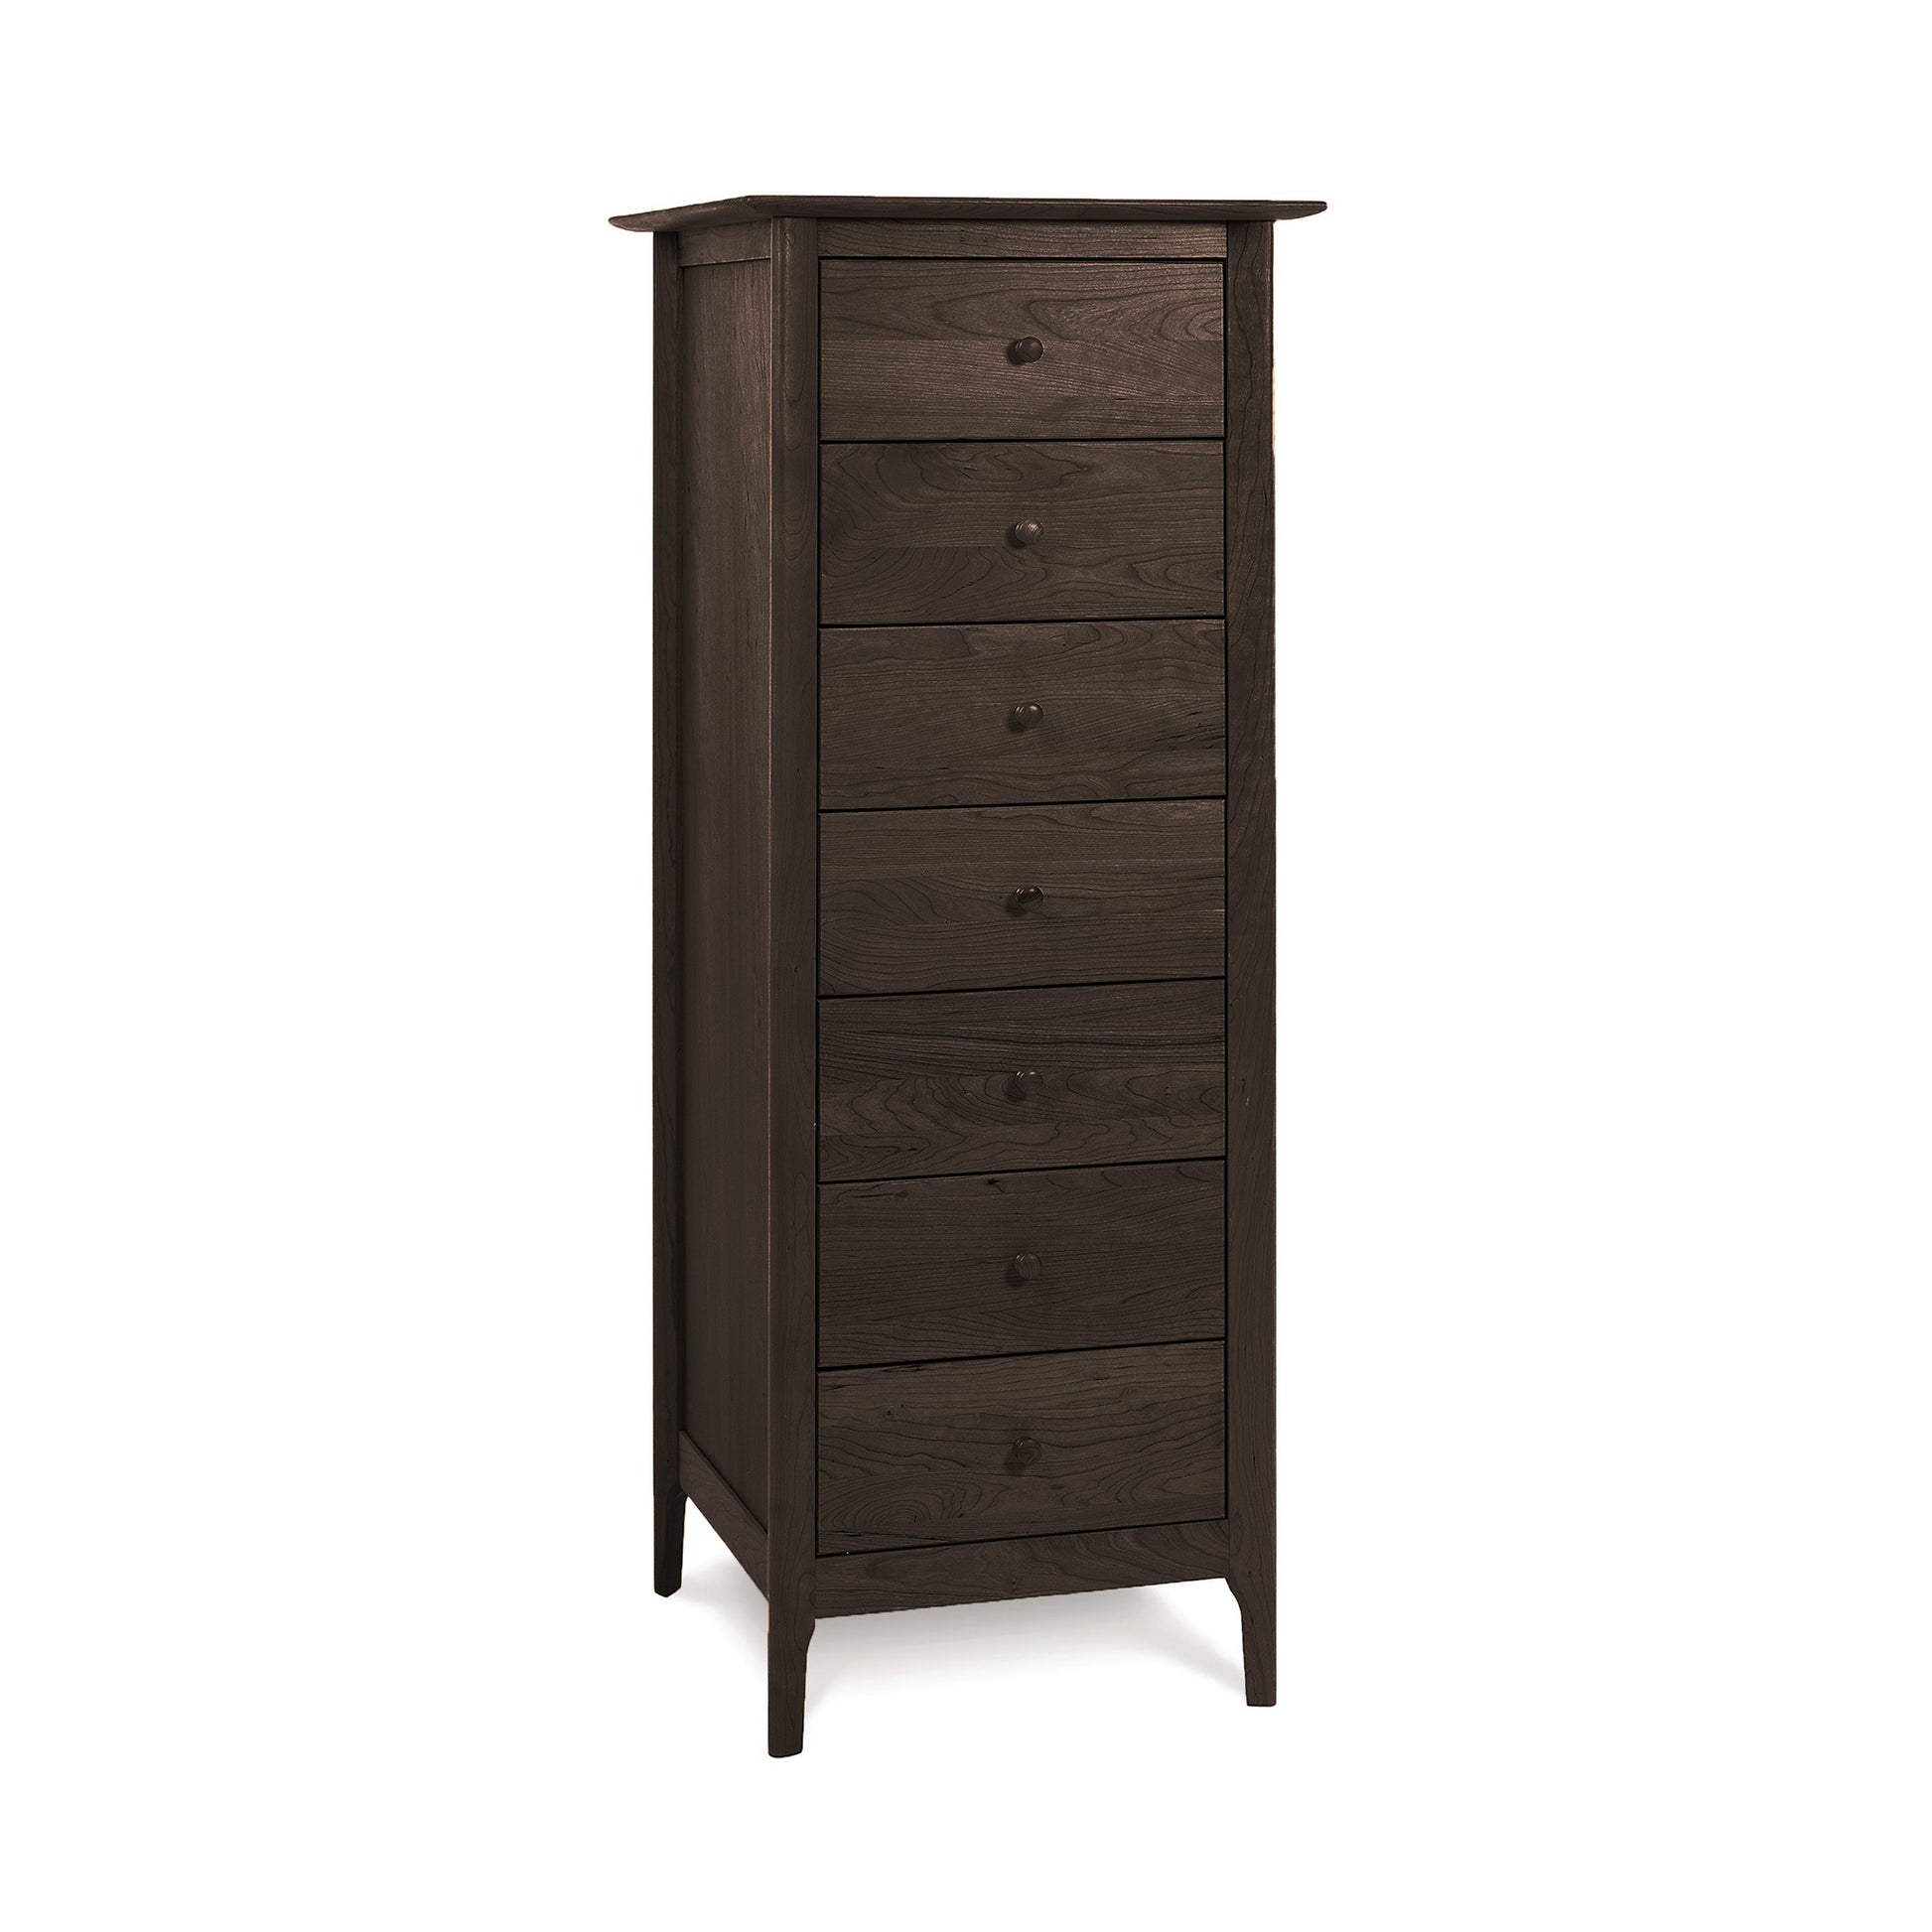 A tall, dark wooden Sarah 7-Drawer Lingerie Chest from the Copeland Furniture Bedroom Furniture Collection, isolated on a white background.